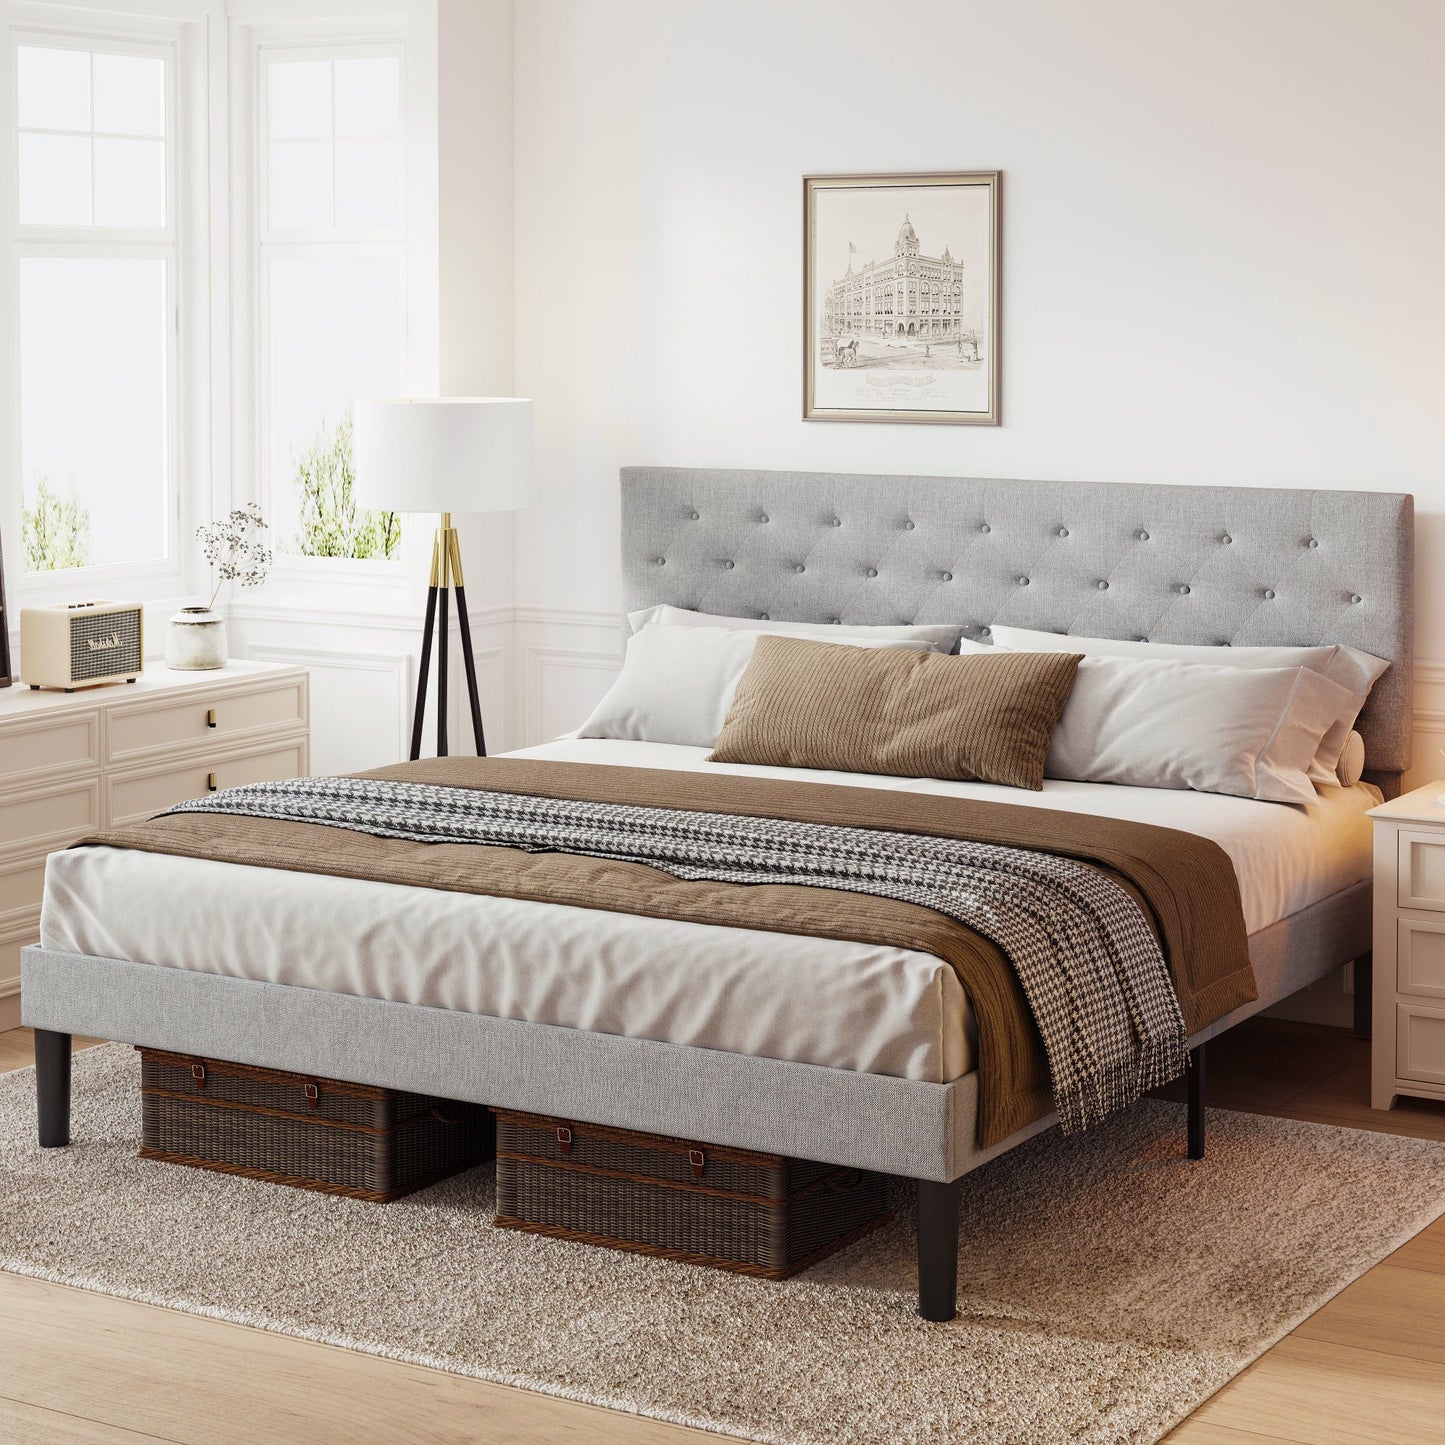 Simple Queen Size Grey Bed frame, Adjustable Headboard Home Decor by Design